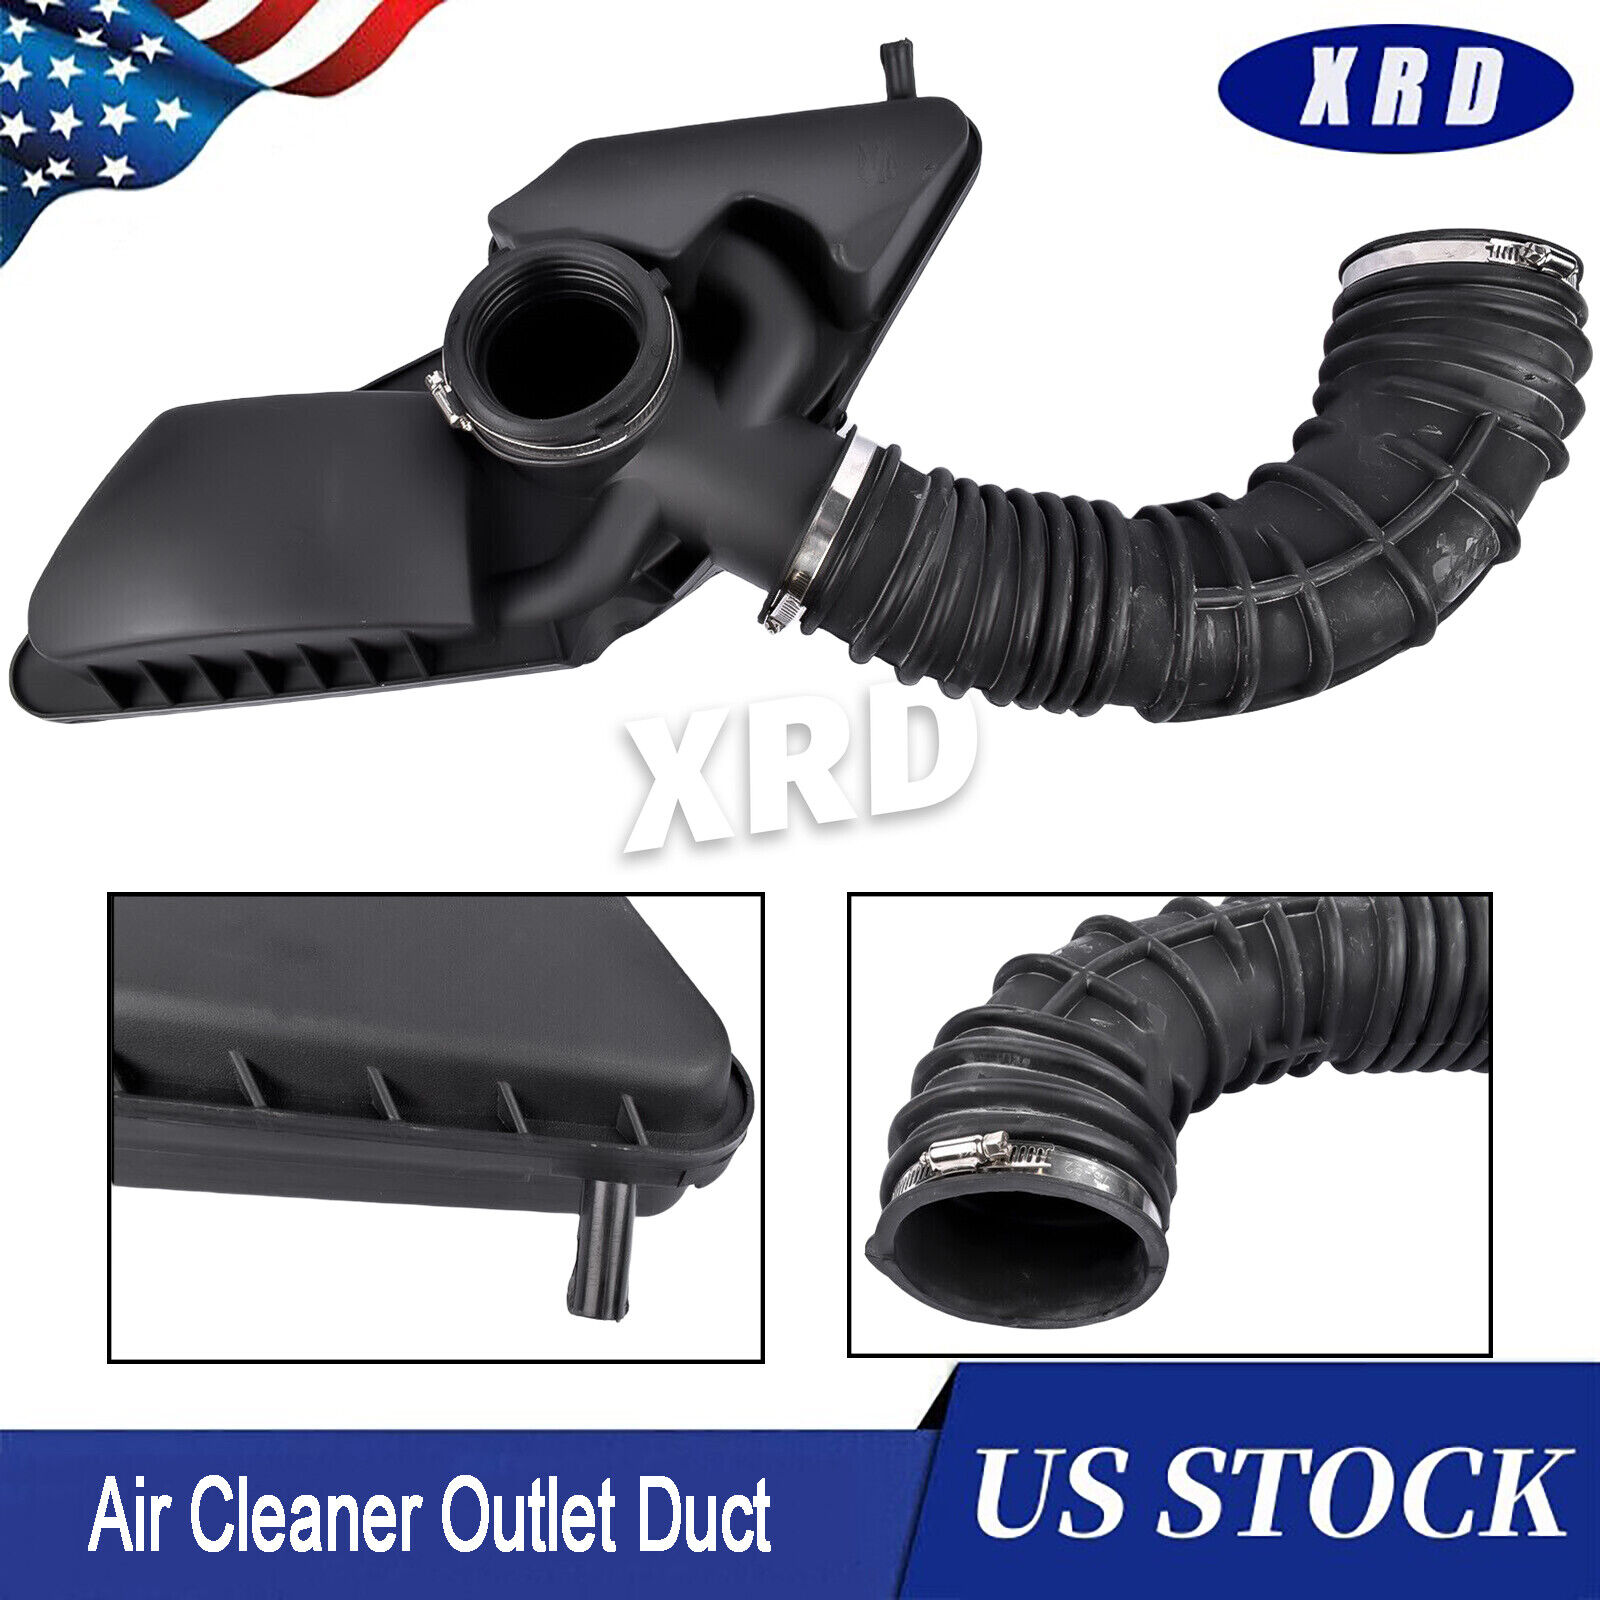 Outlet Duct + Air Intake Hose Tube For 2.4L Buick Regal Chevrolet Malibu Impala